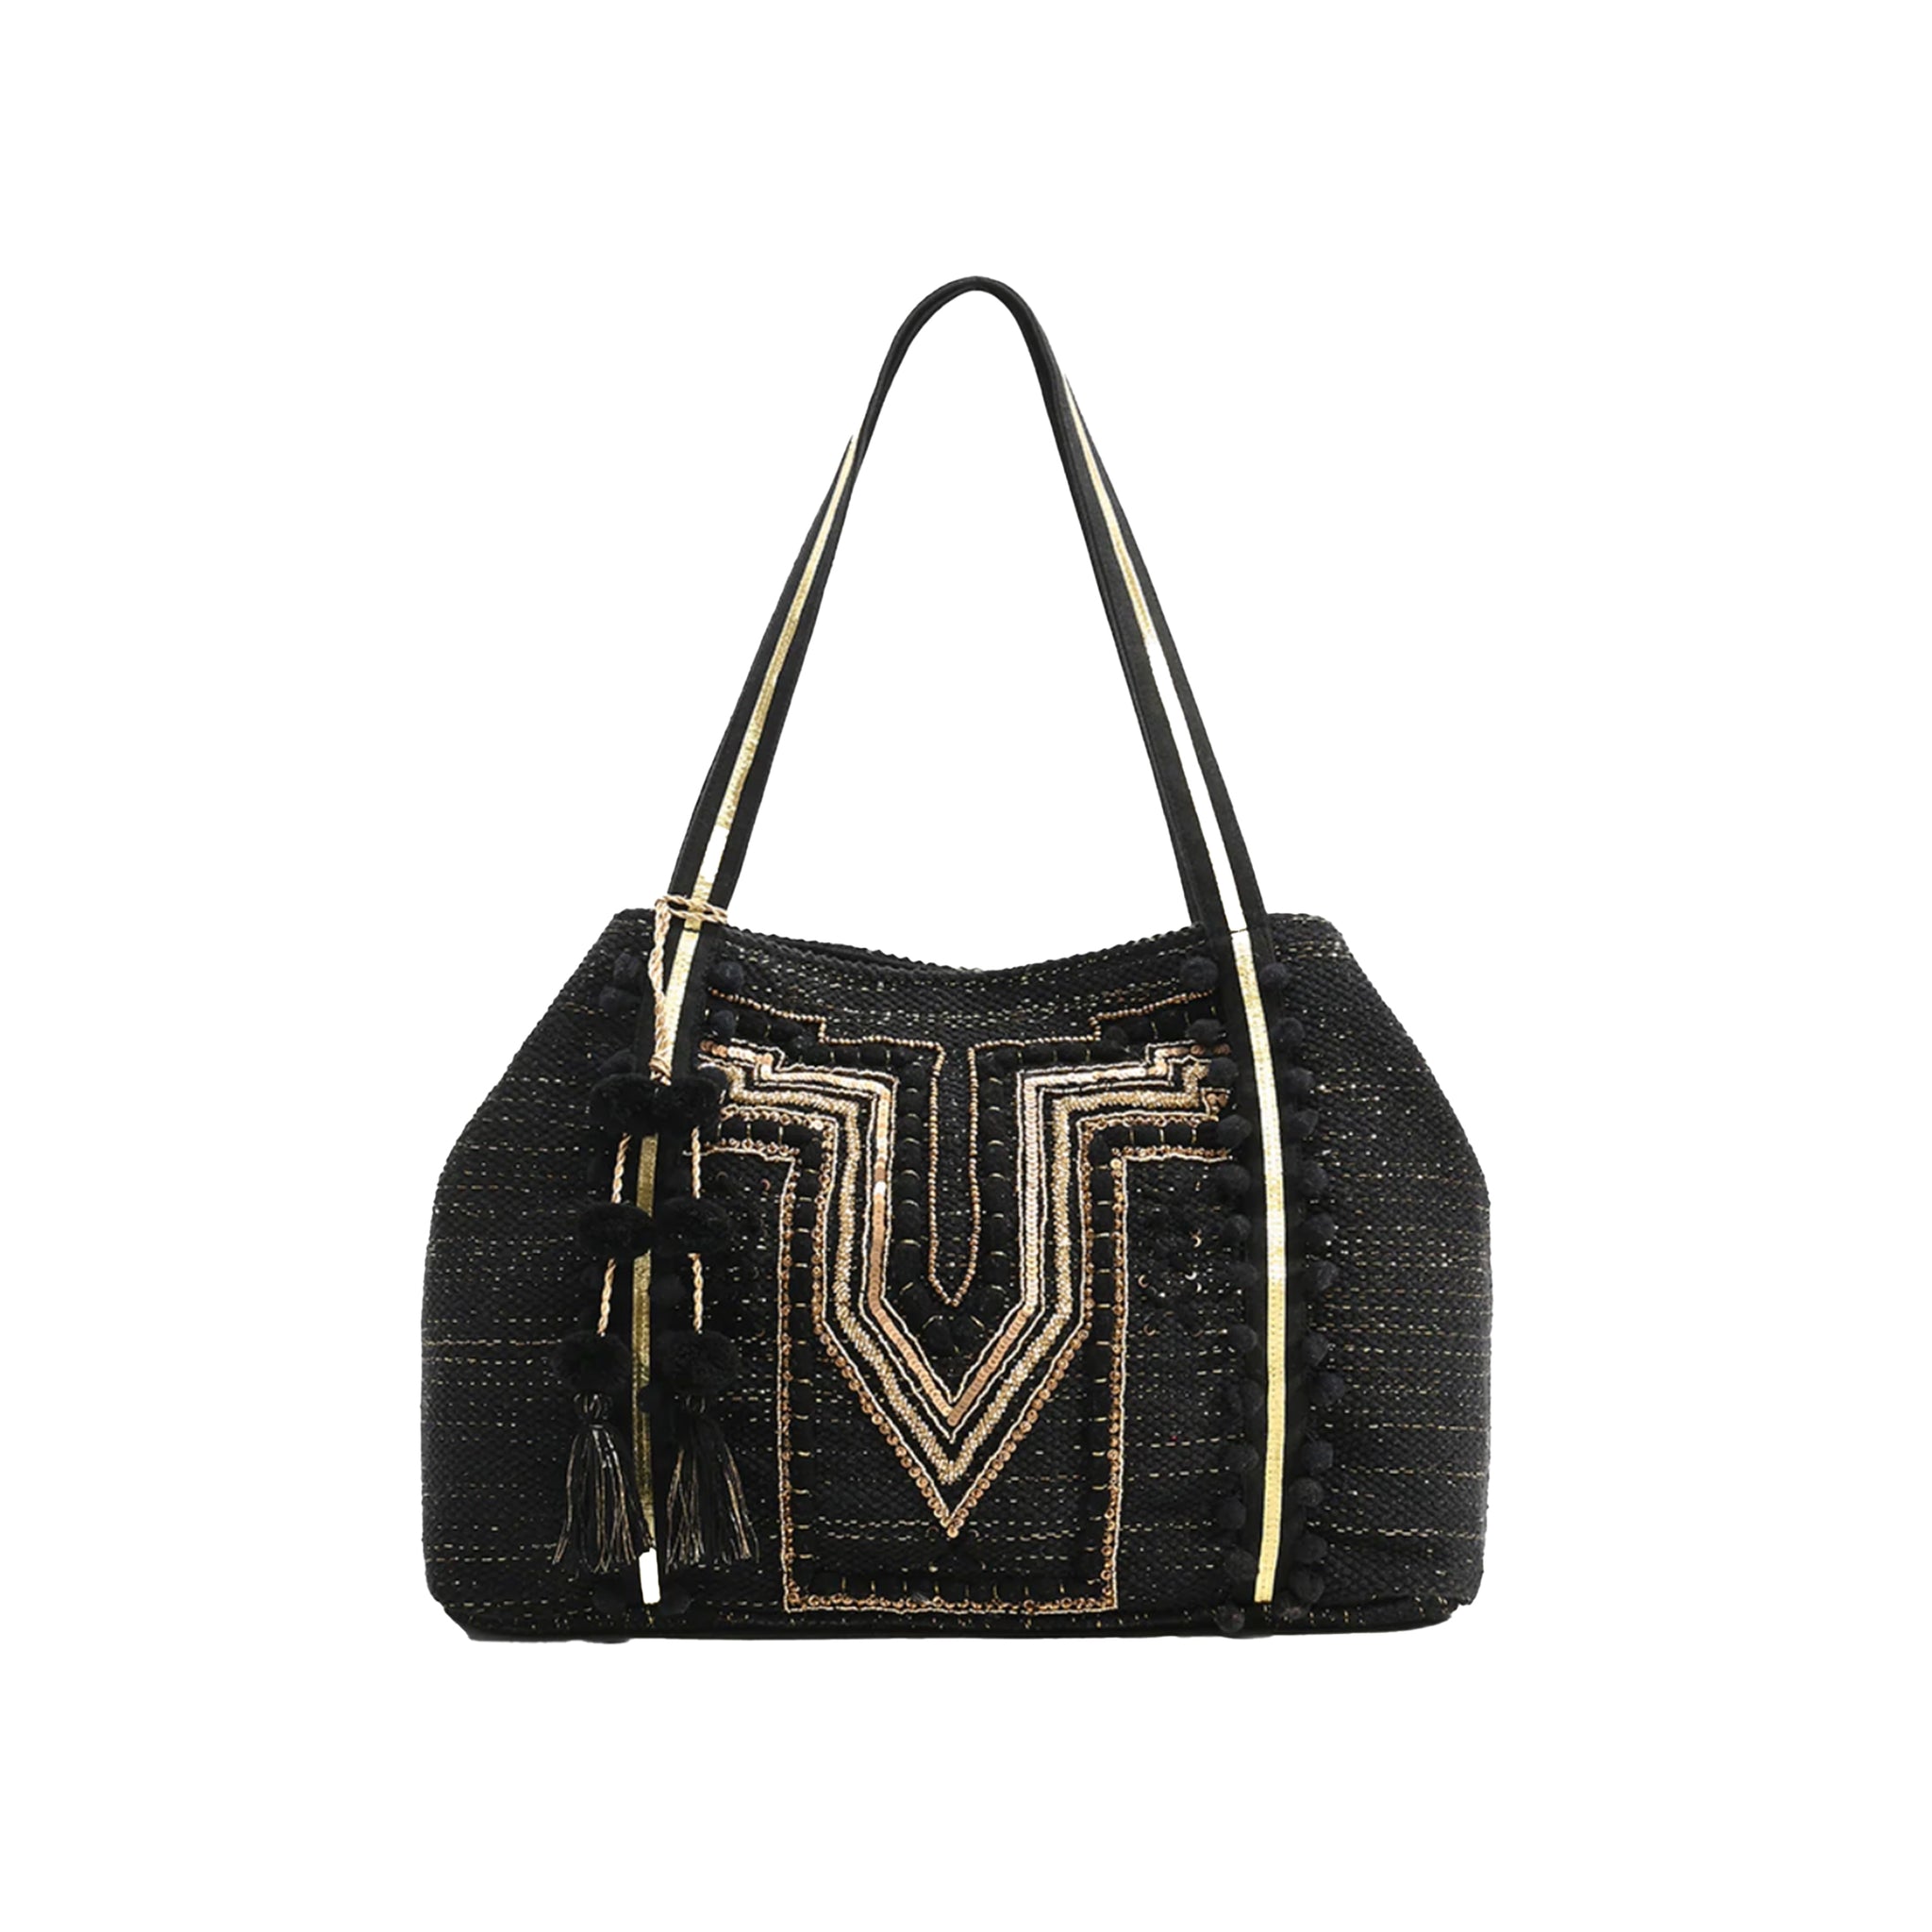 Black and Gold Embellished Beach Tote